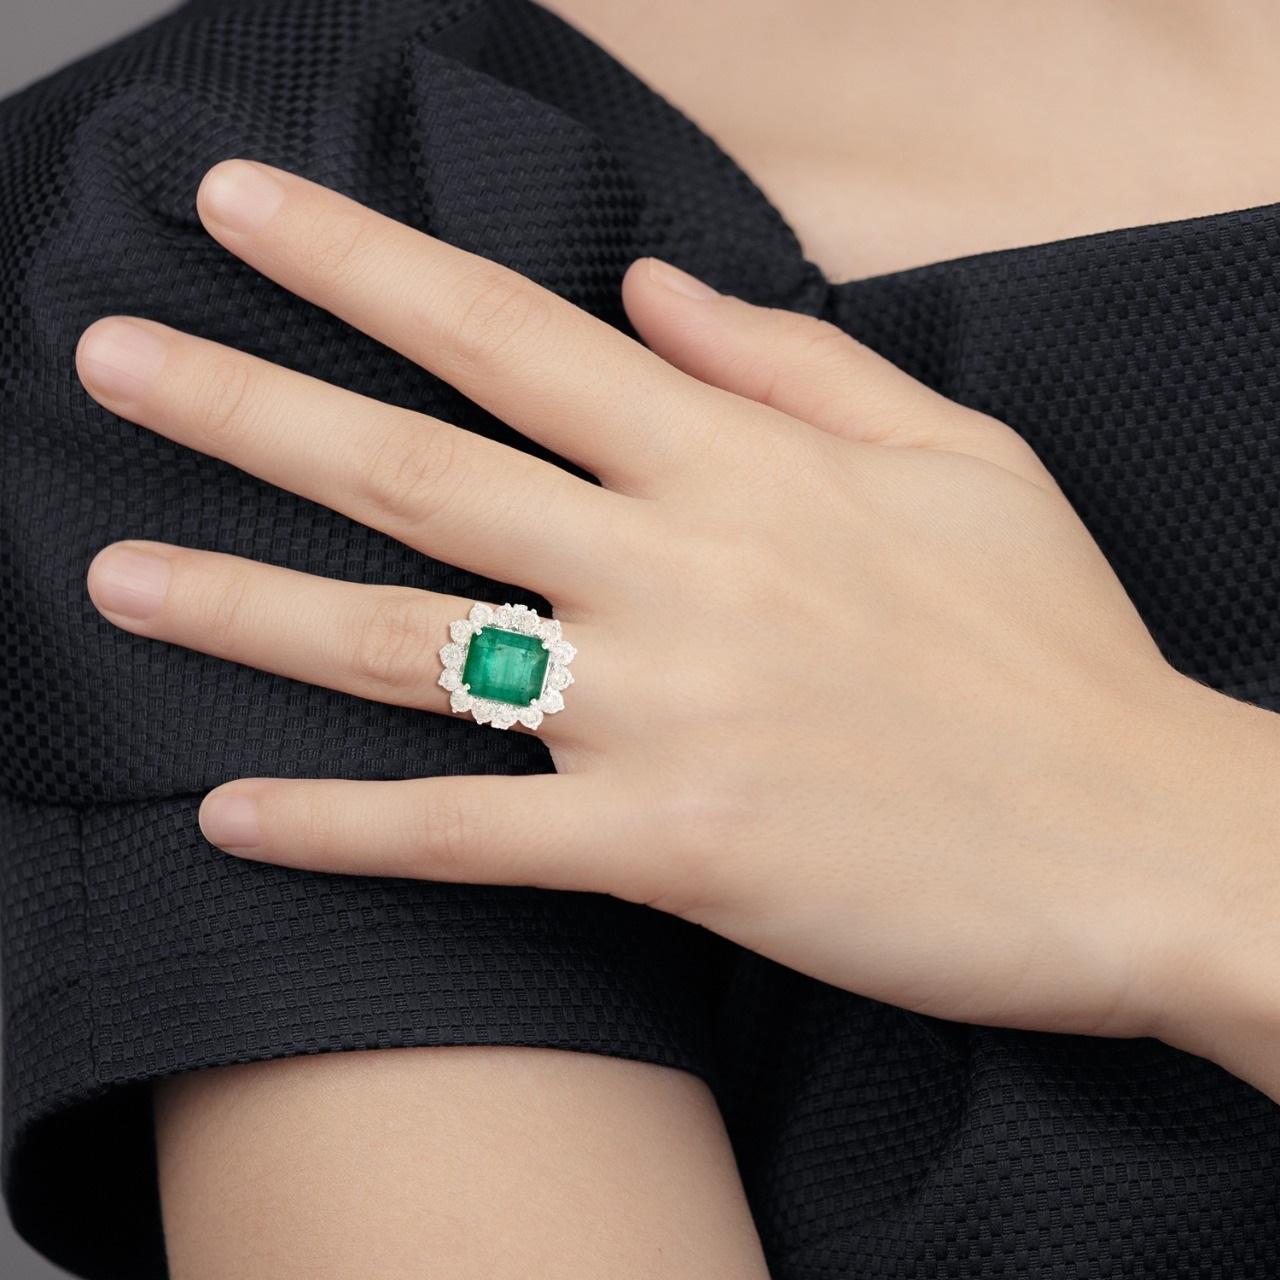 For Sale:  Natural Emerald Gemstone Cocktail Ring Diamond Solid 18k White Gold Fine Jewelry 5